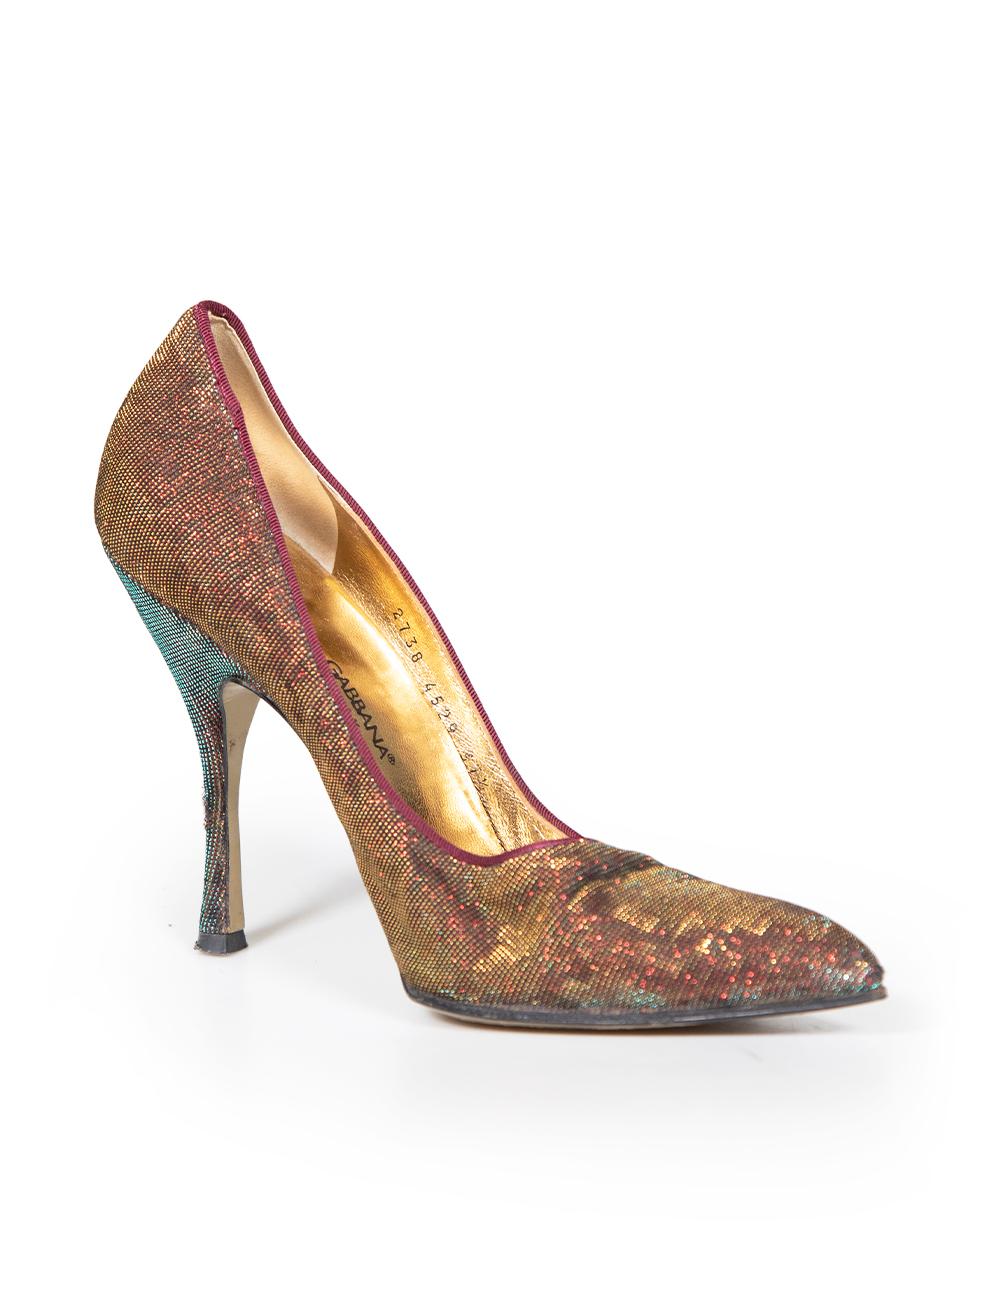 CONDITION is Very good. Minimal wear to shoes is evident. Minimal wear to both shoe toes and the left shoe heel with plucks and abrasions to the mesh on this used Dolce & Gabbana designer resale item.
 
 
 
 Details
 
 
 Vintage
 
 Multicolour